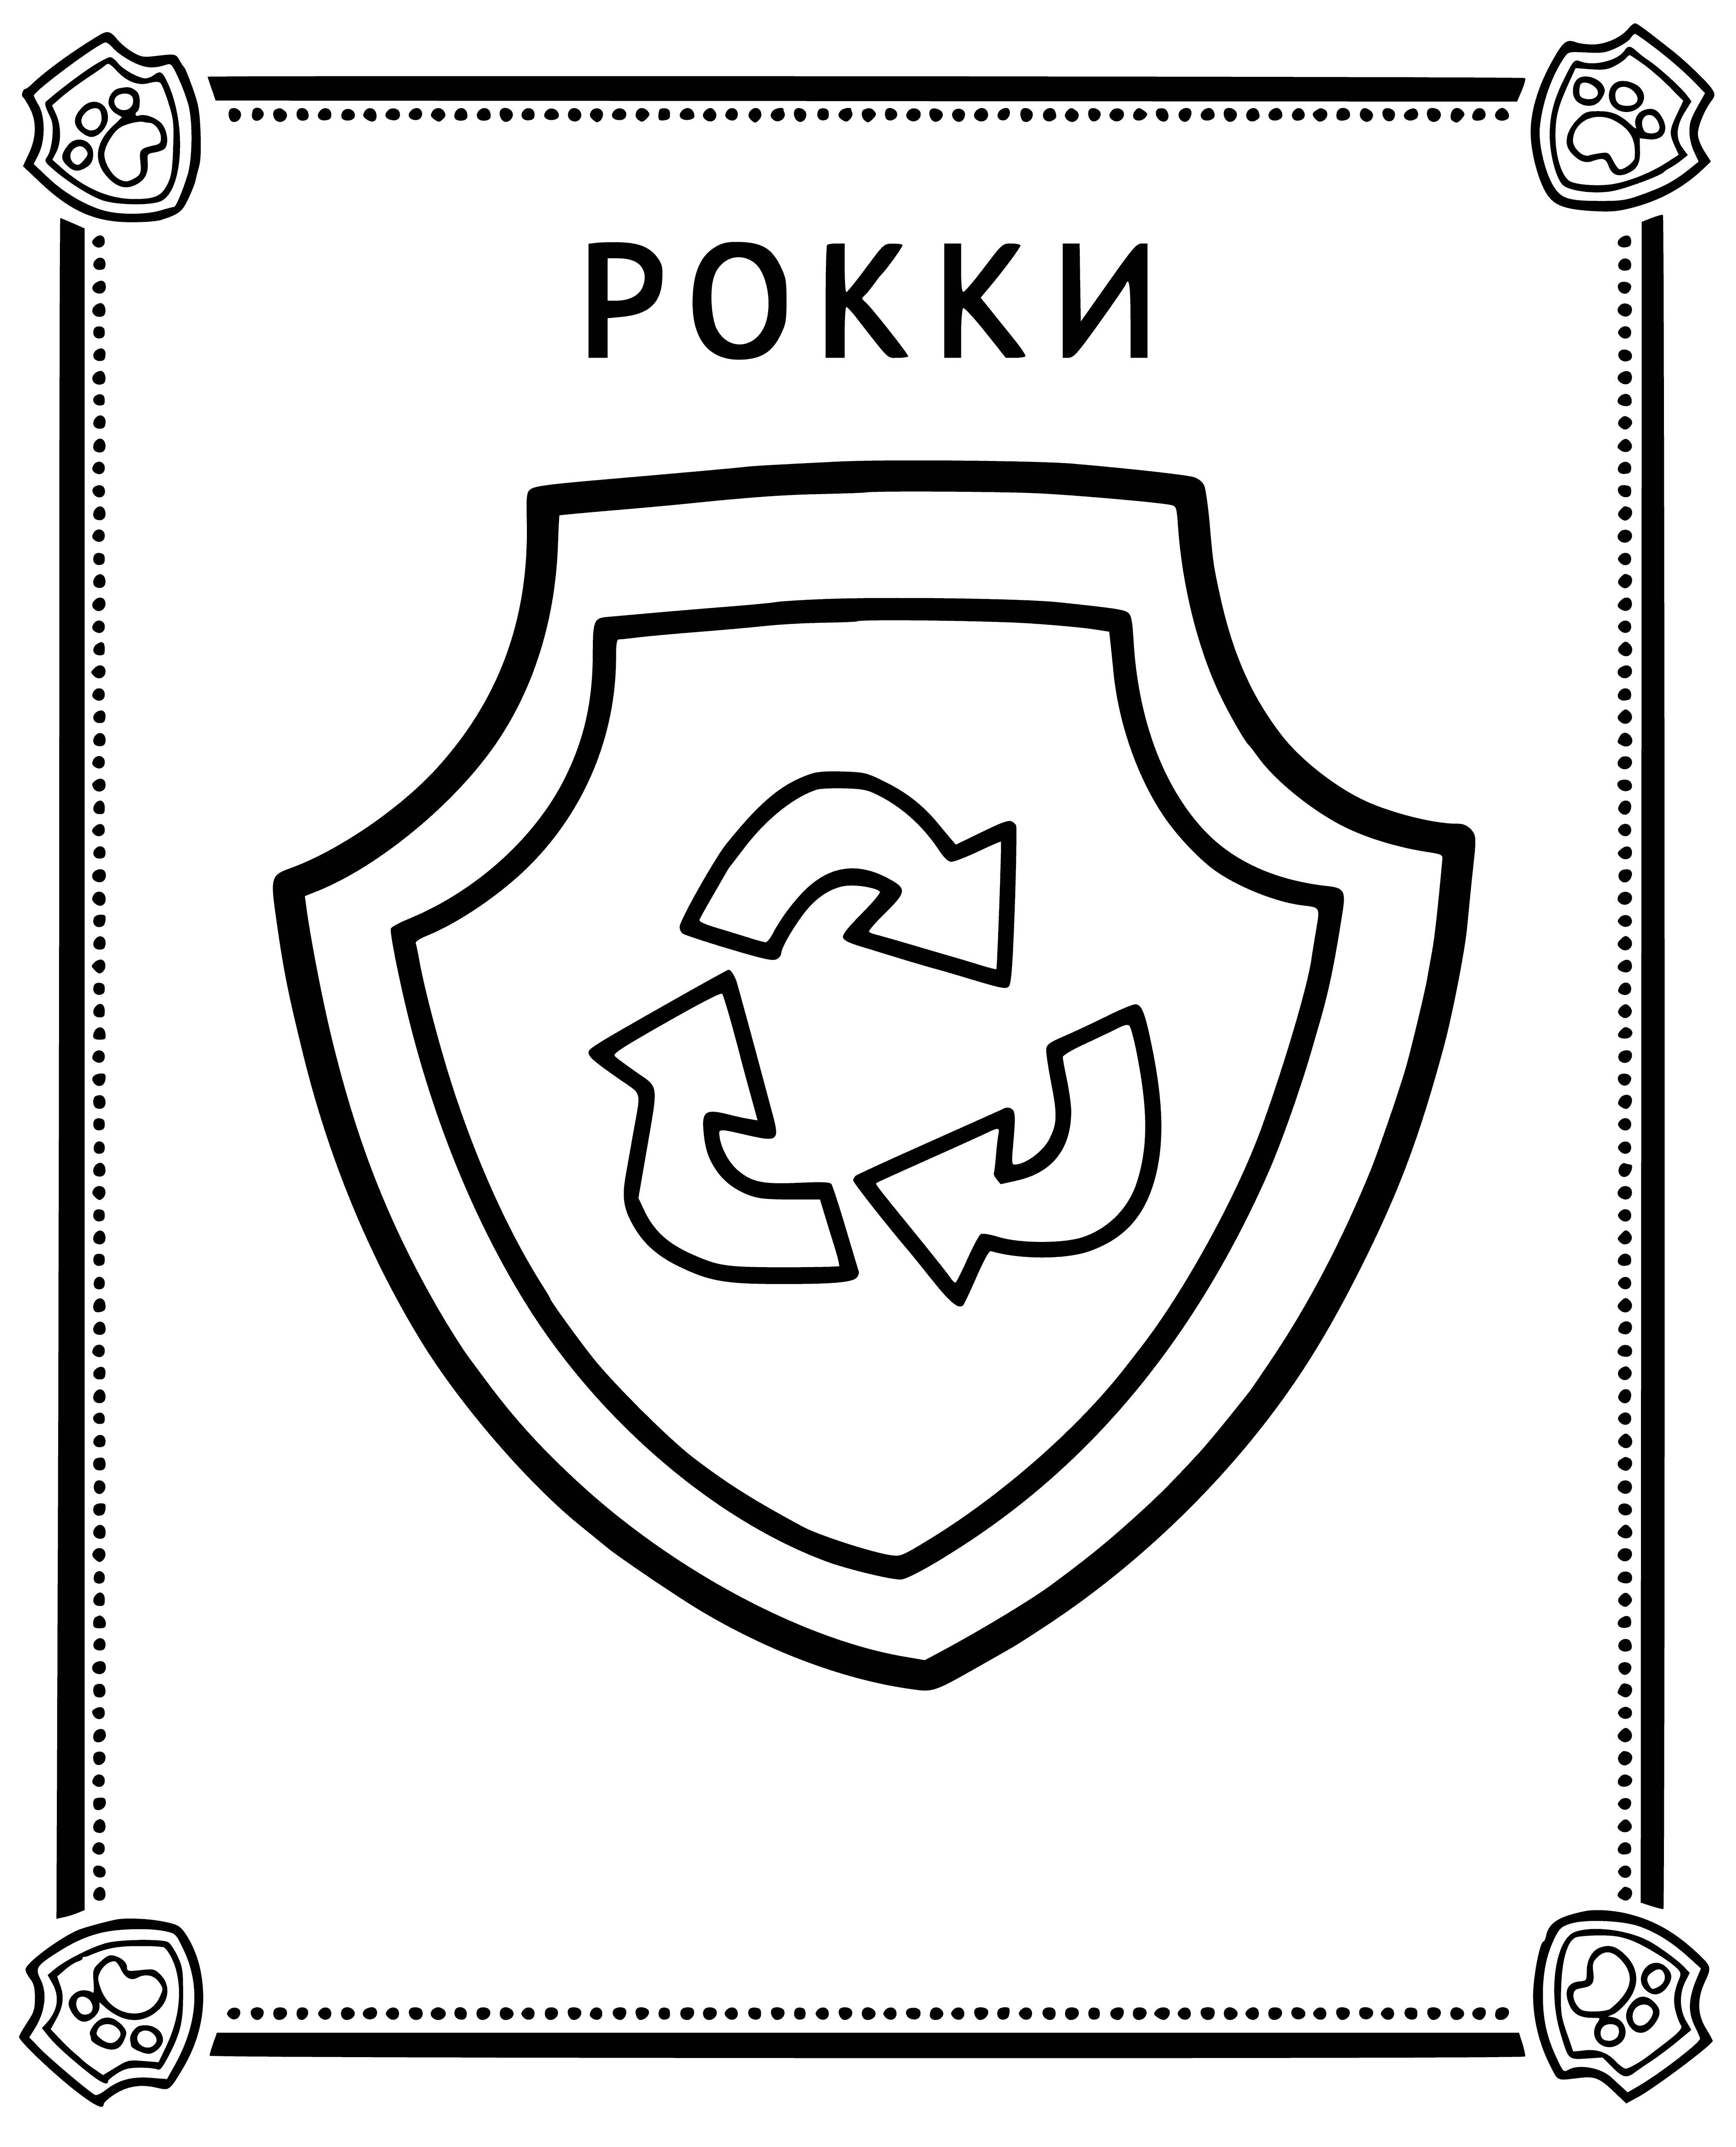 Rocky sign coloring page